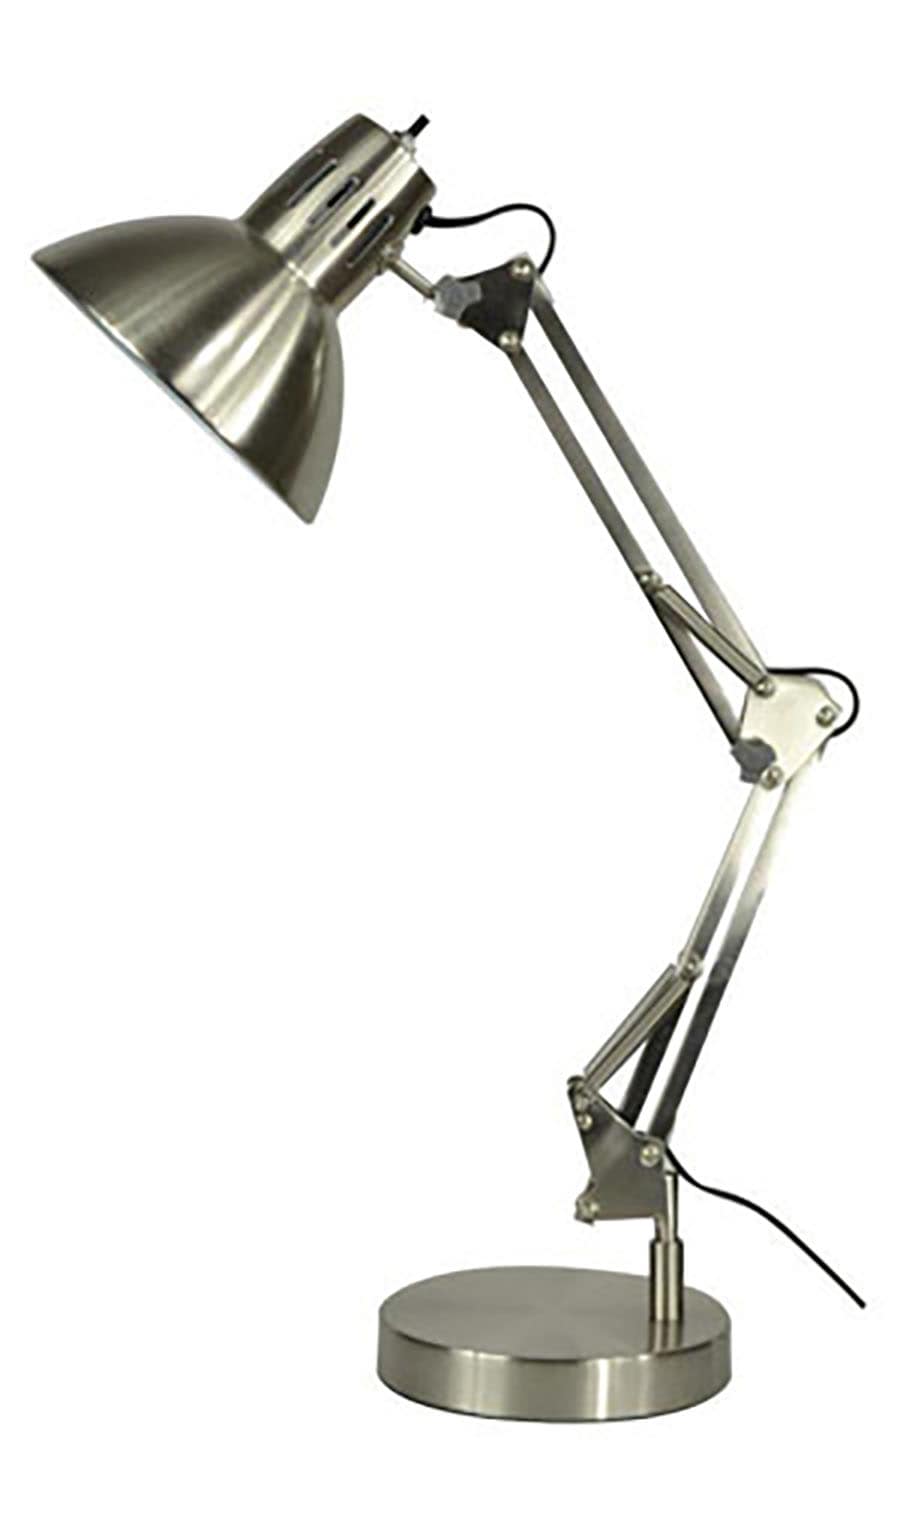 allen + roth Embleton 26-in Adjustable Bronze Desk Lamp with Metal Shade in  the Desk Lamps department at